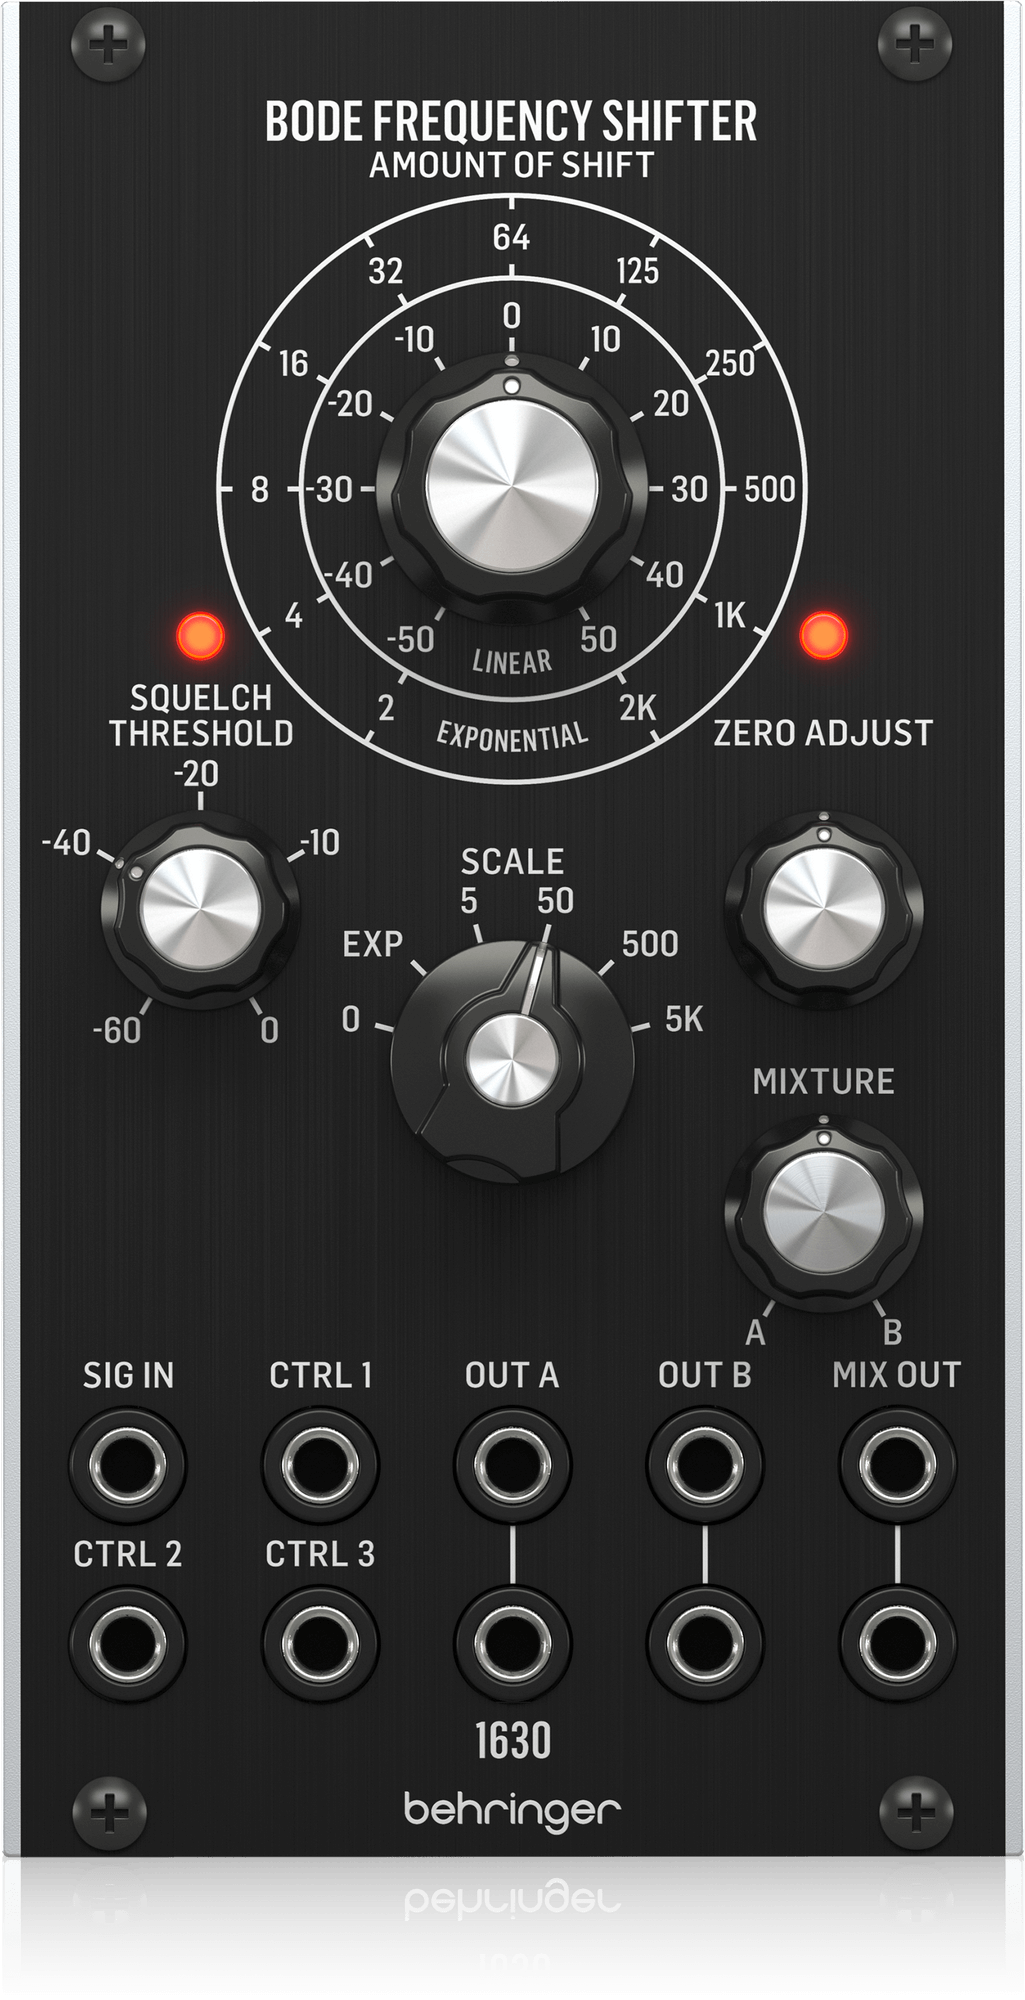 BEHRINGER [BODE FREQUENCY SHIFTER 1630] 周波数シフターモジュール